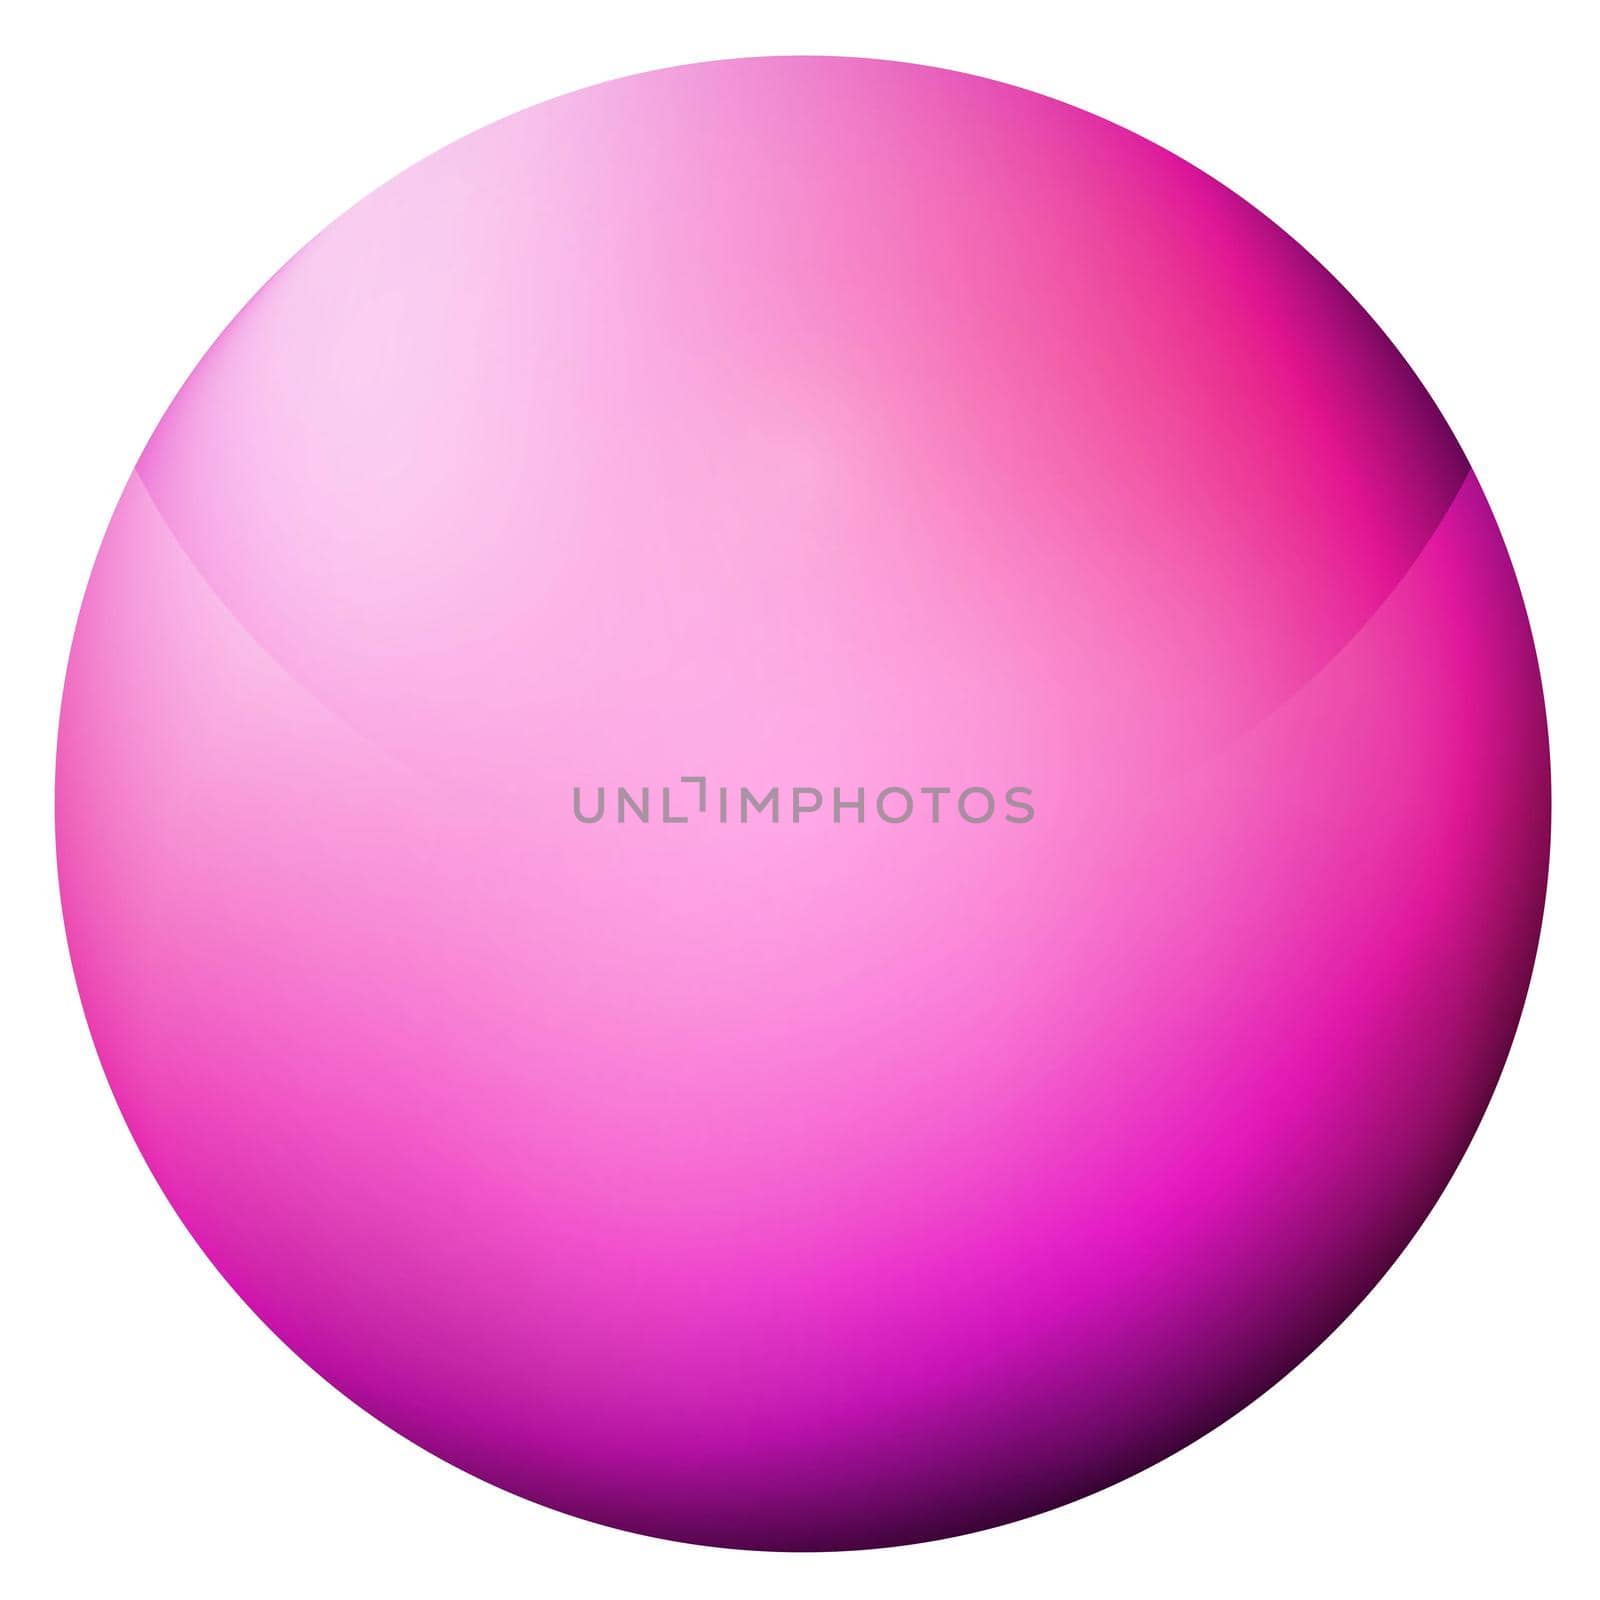 Glass pink ball or precious pearl. Glossy realistic ball, 3D abstract vector illustration highlighted on a white background. Big metal bubble with shadow by allaku